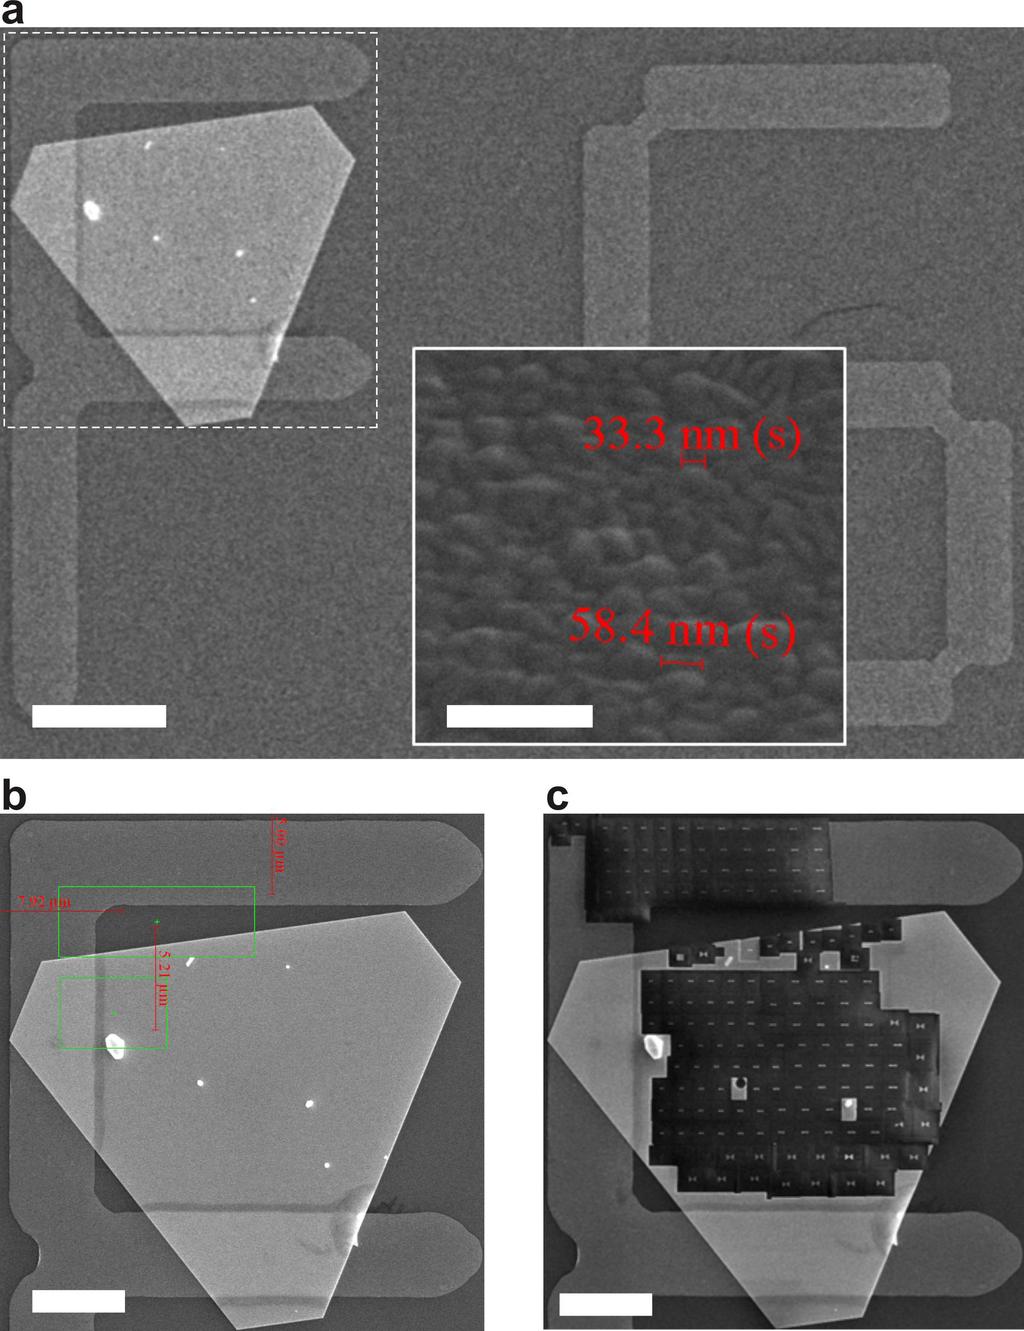 Supplementary Figure S7 SEM image of an area containing chemically synthesized single- and vapor-deposited multi-crystalline gold films.